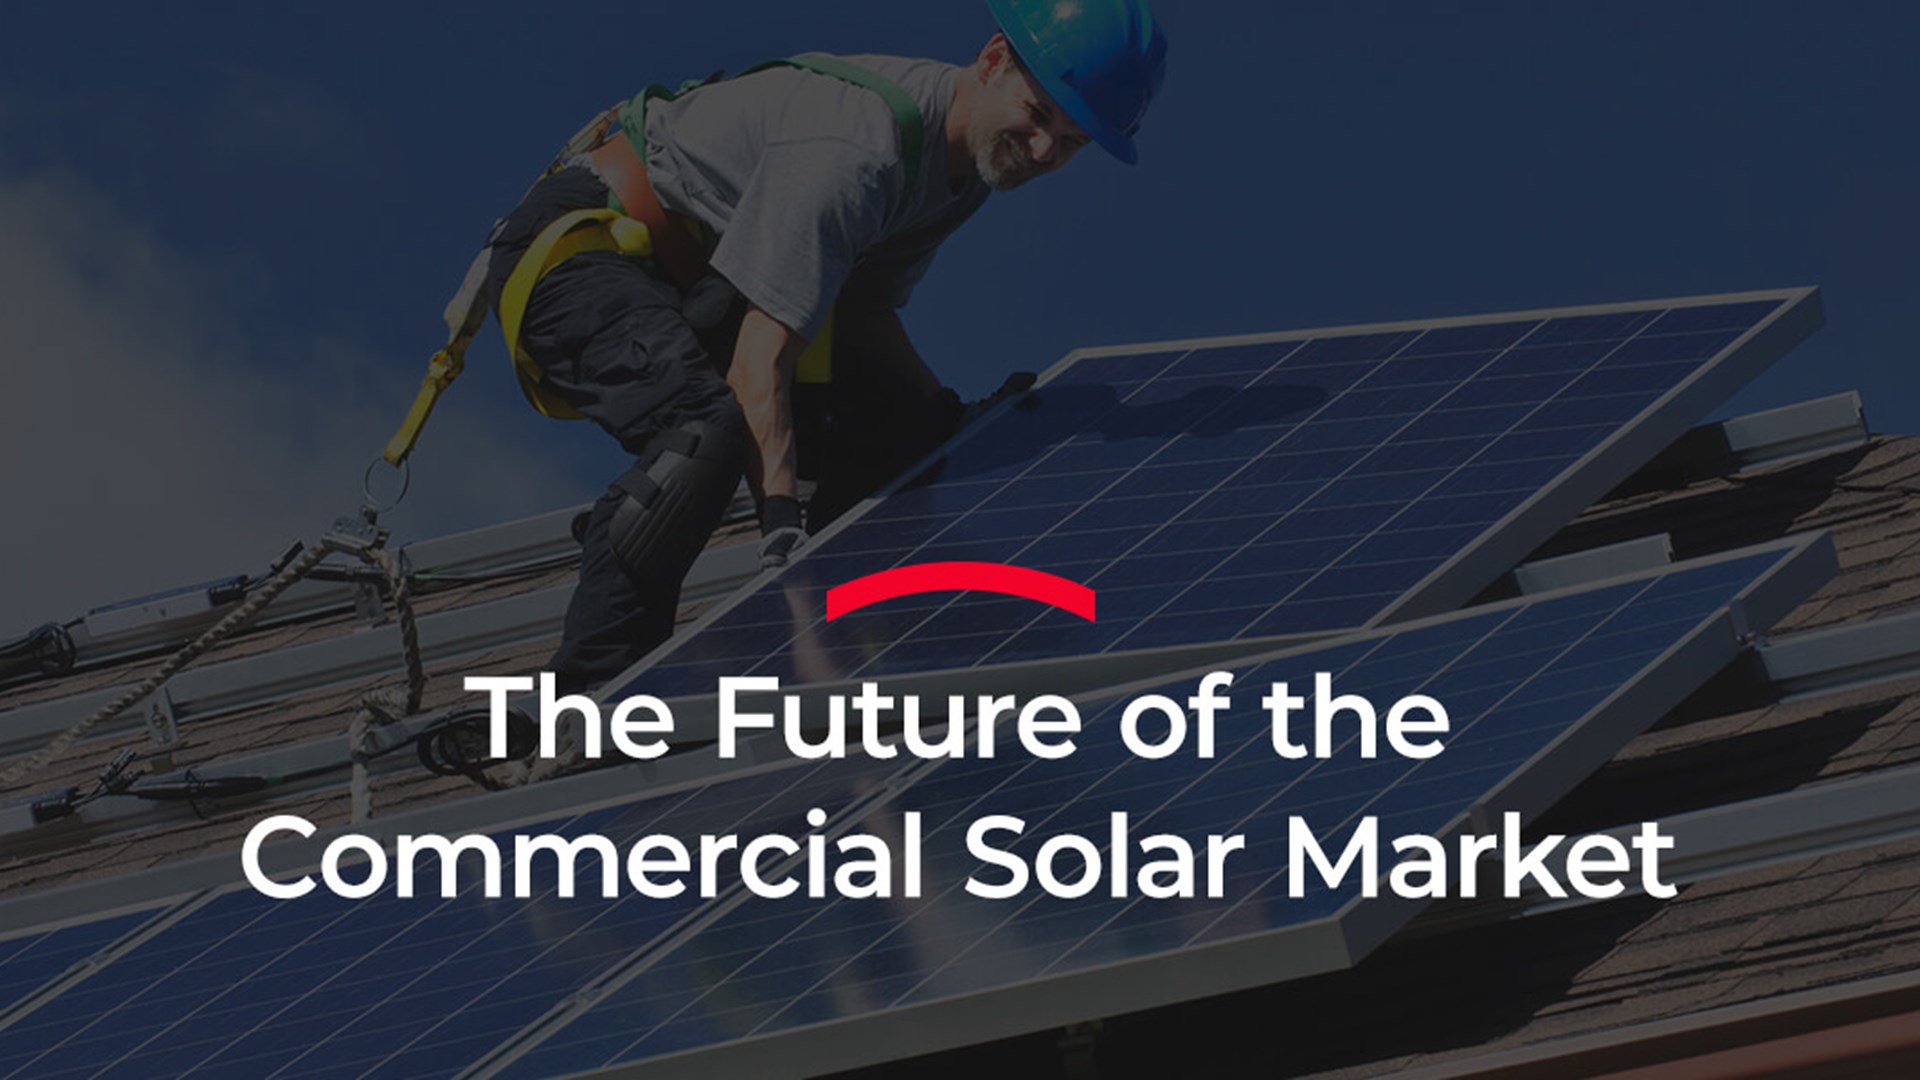 The Future of the Commercial Solar Market